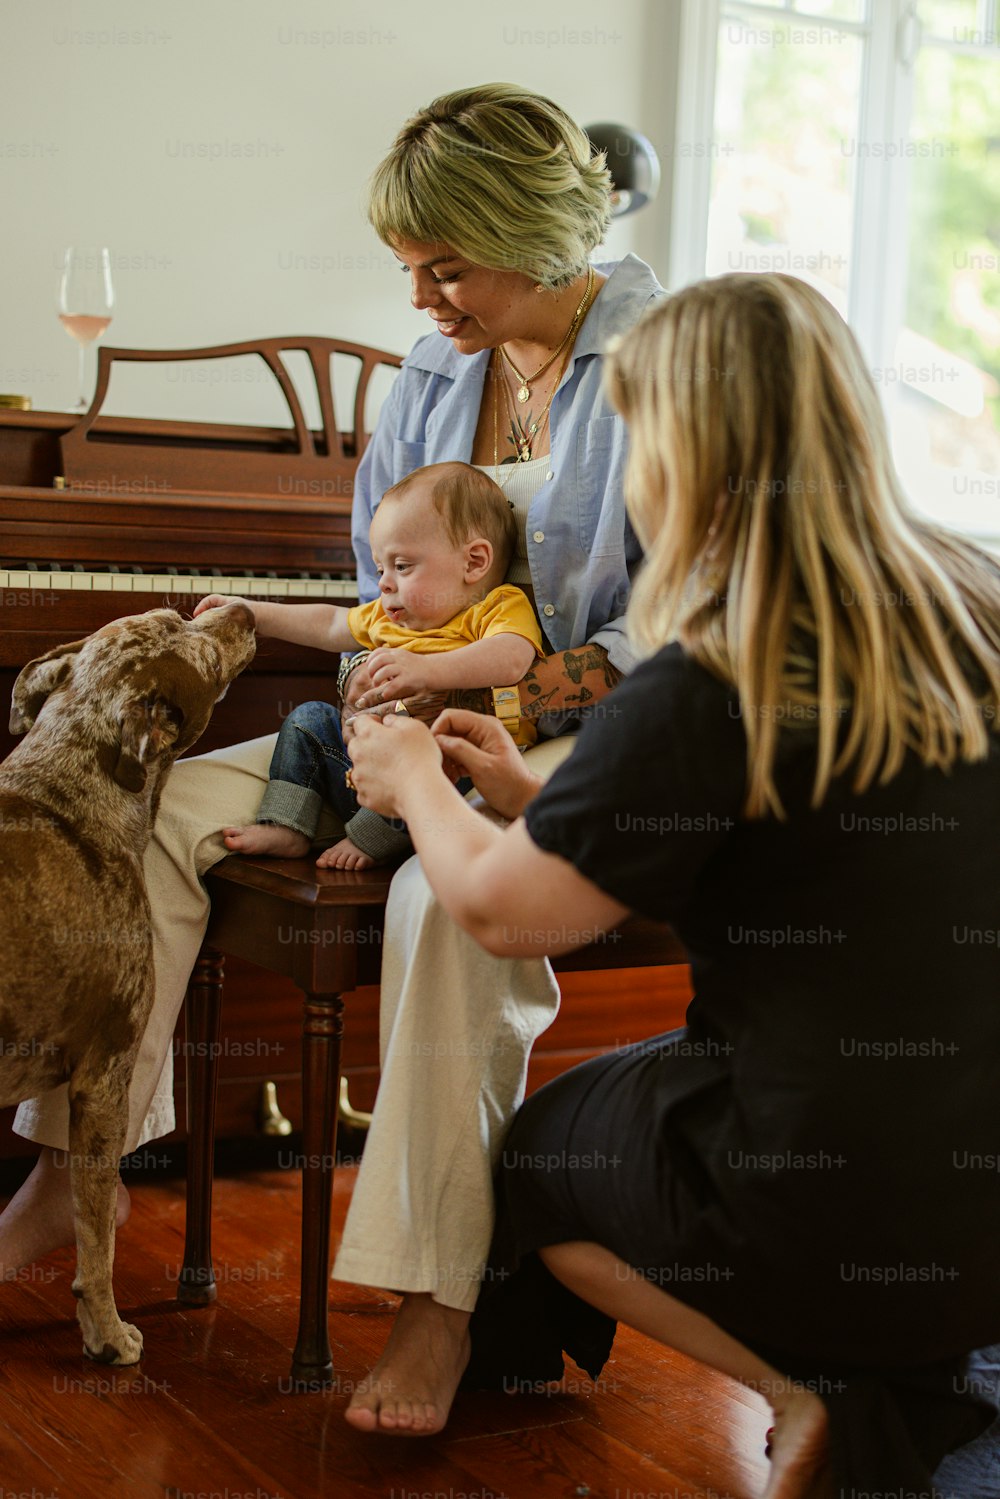 a woman sitting on a chair with a baby and a dog